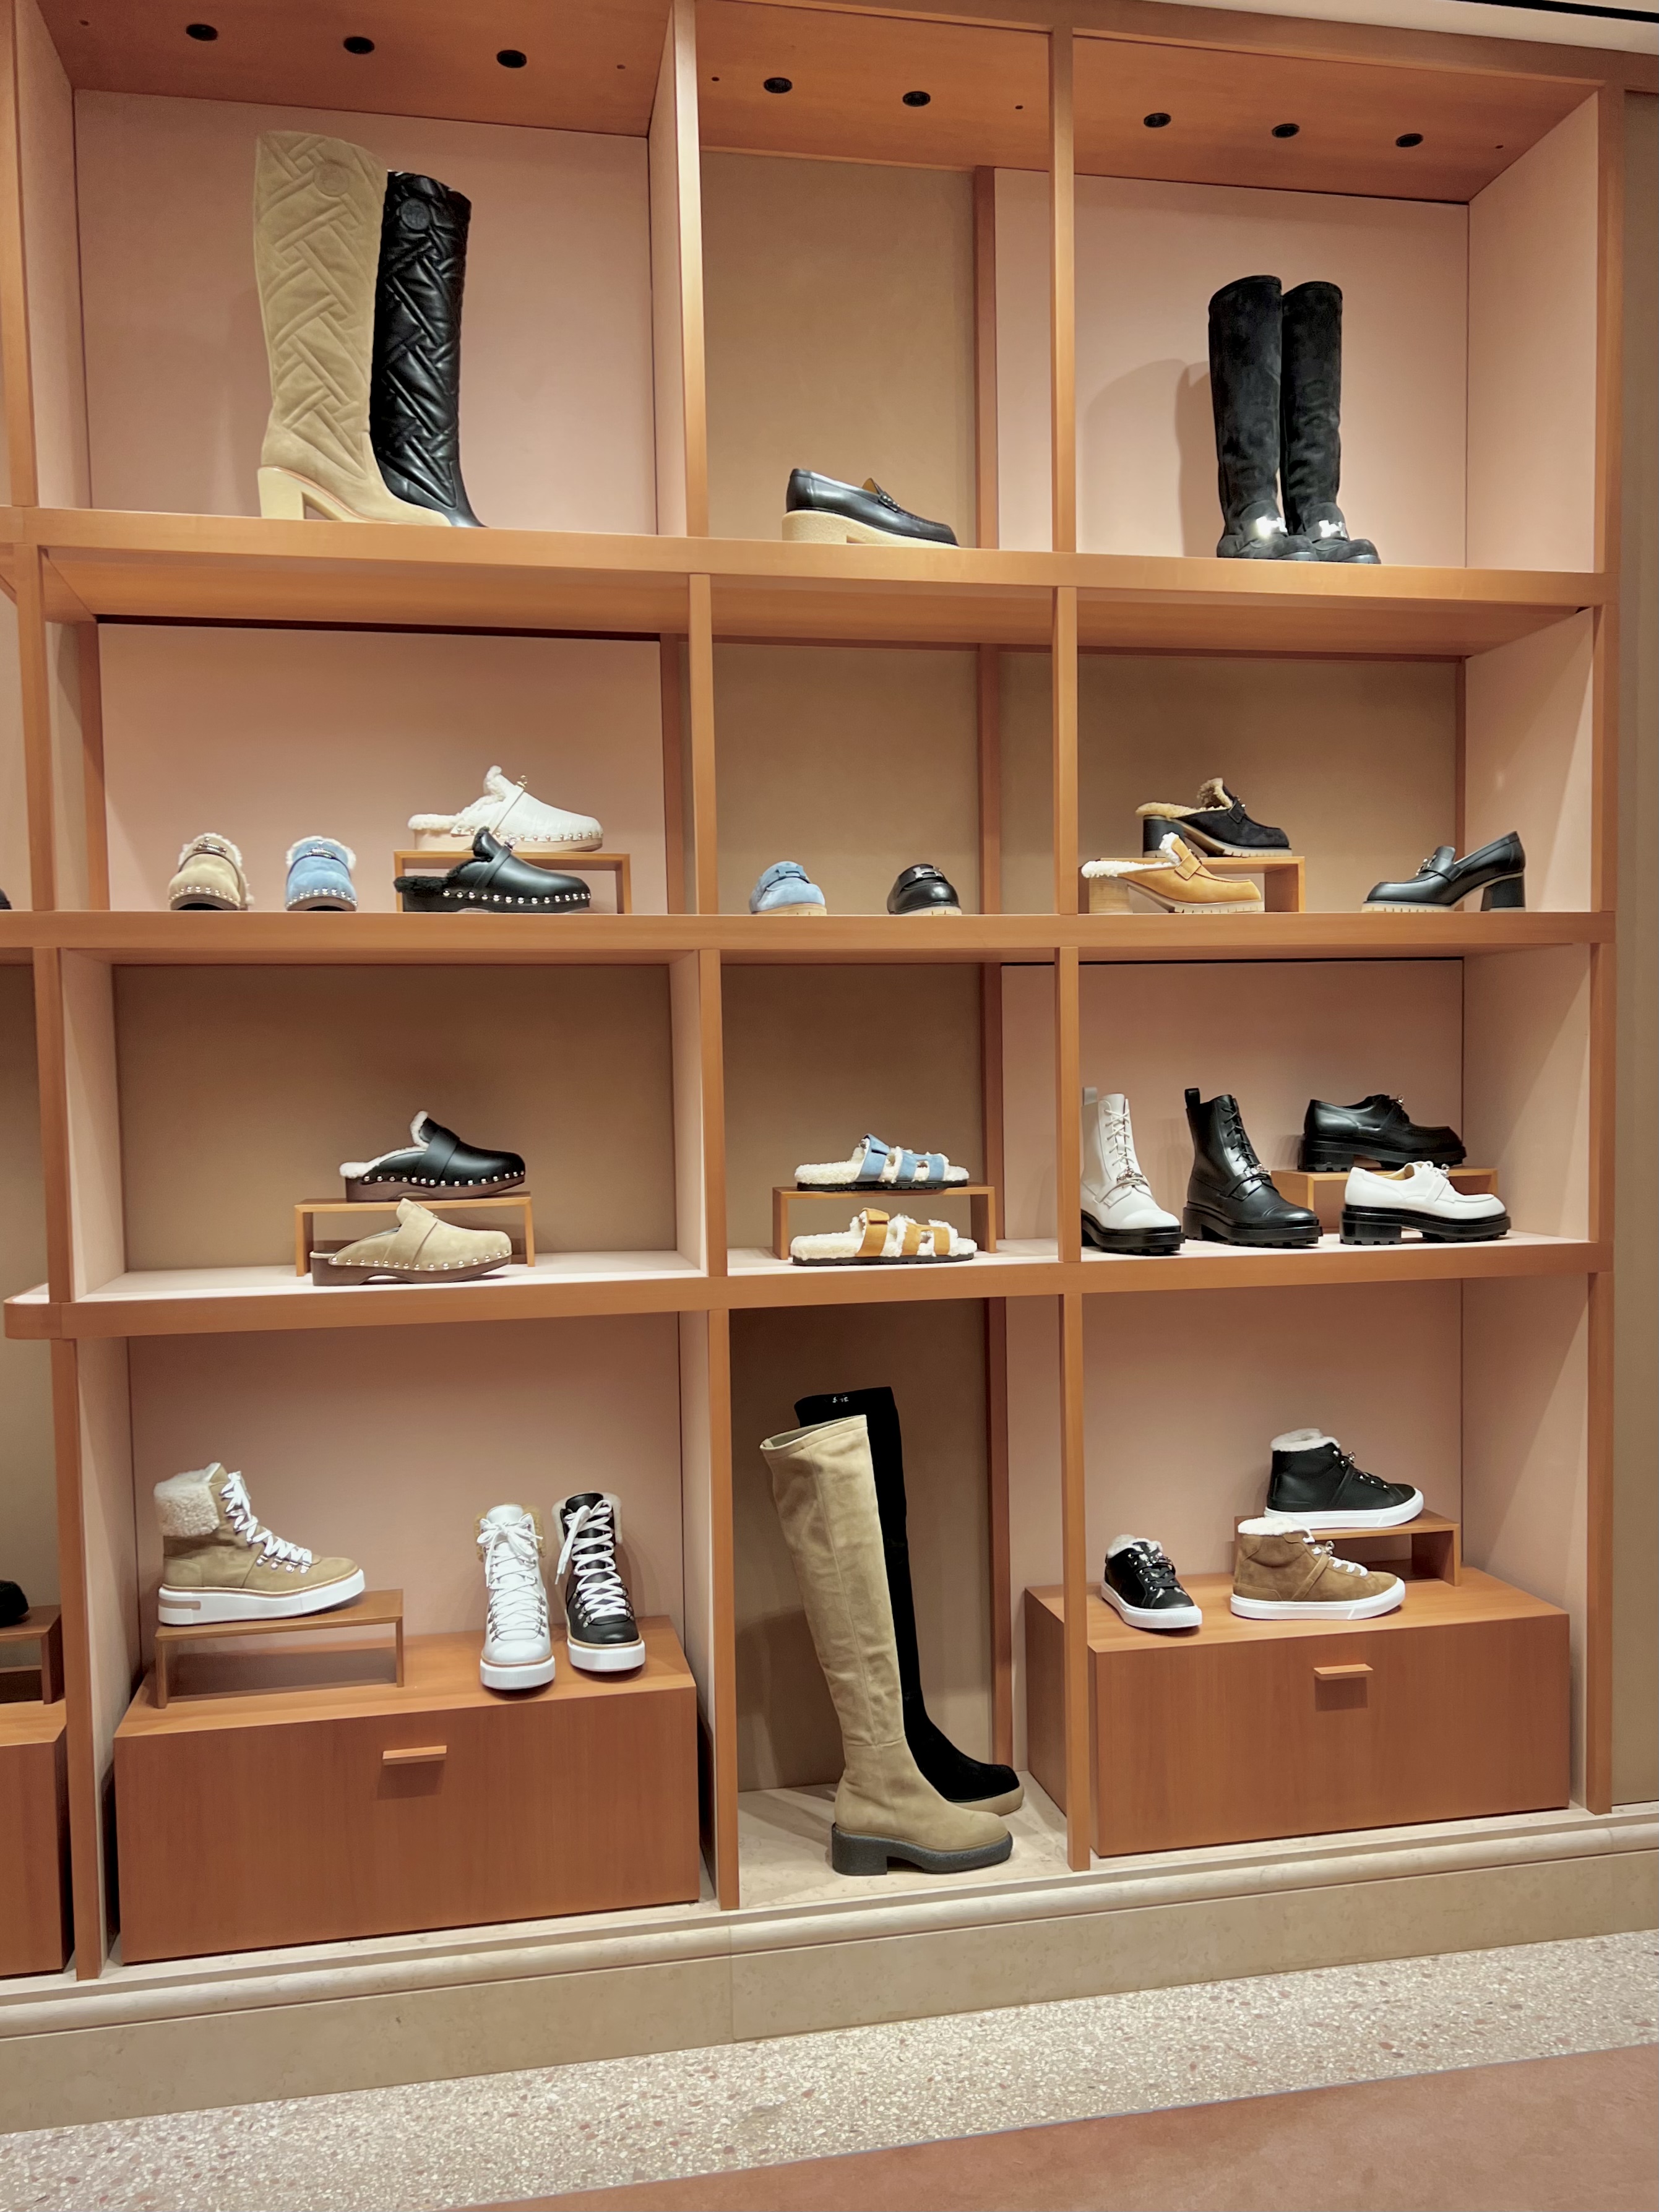 Third Floor Women’s Shoes. Photo via @The_Notorious_Pink.